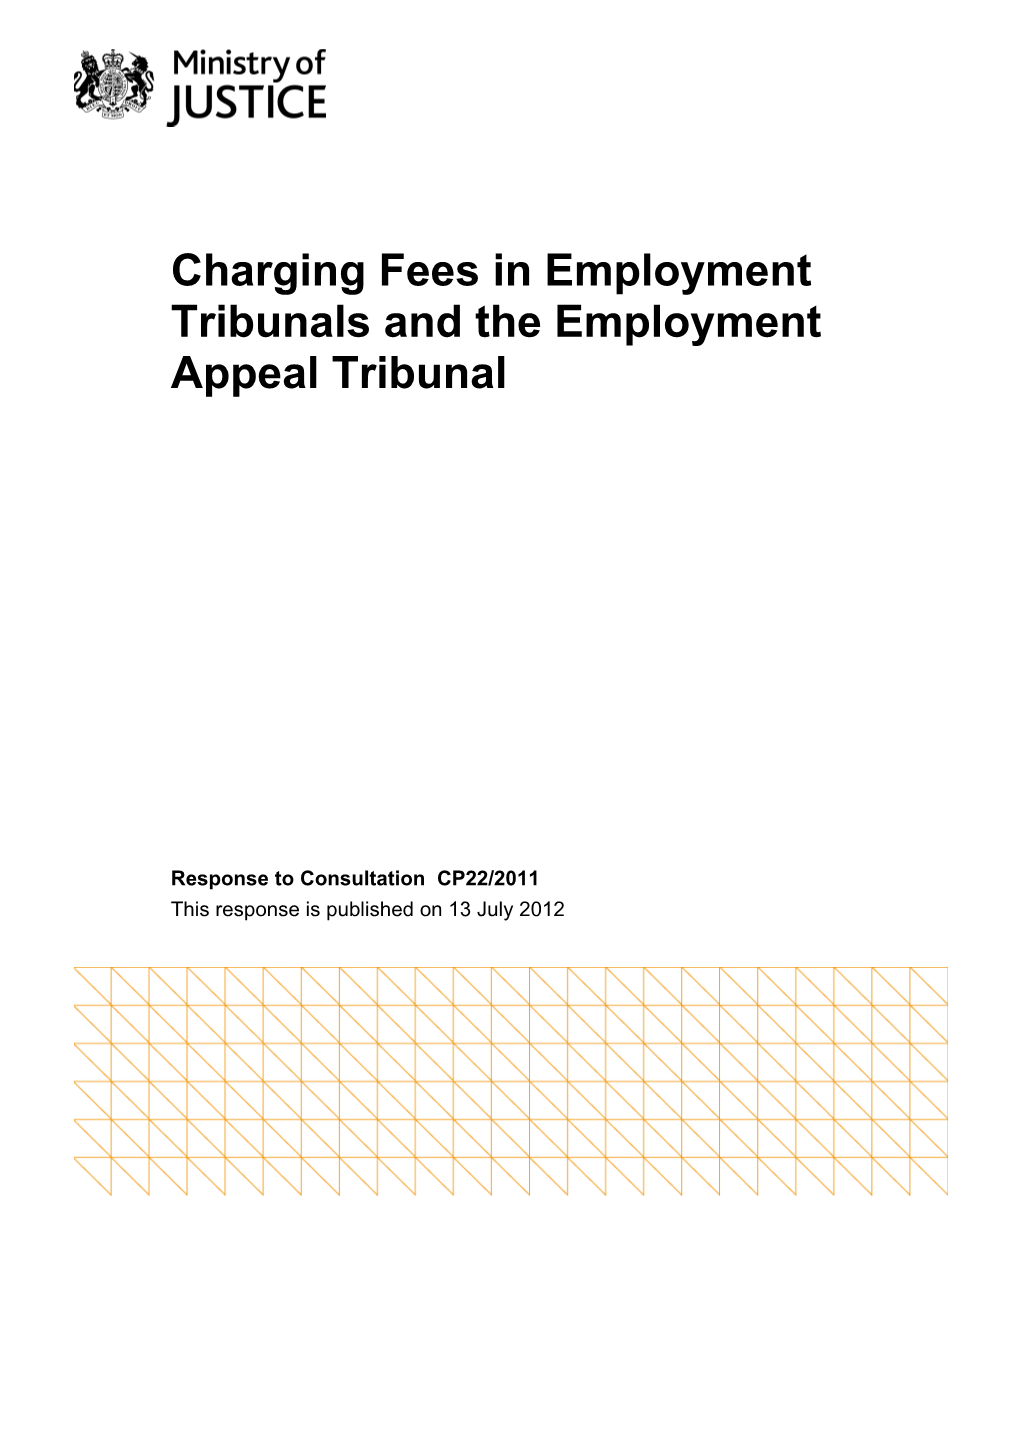 Charging Fees in Employment Tribunals and the Employment Appeal Tribunal